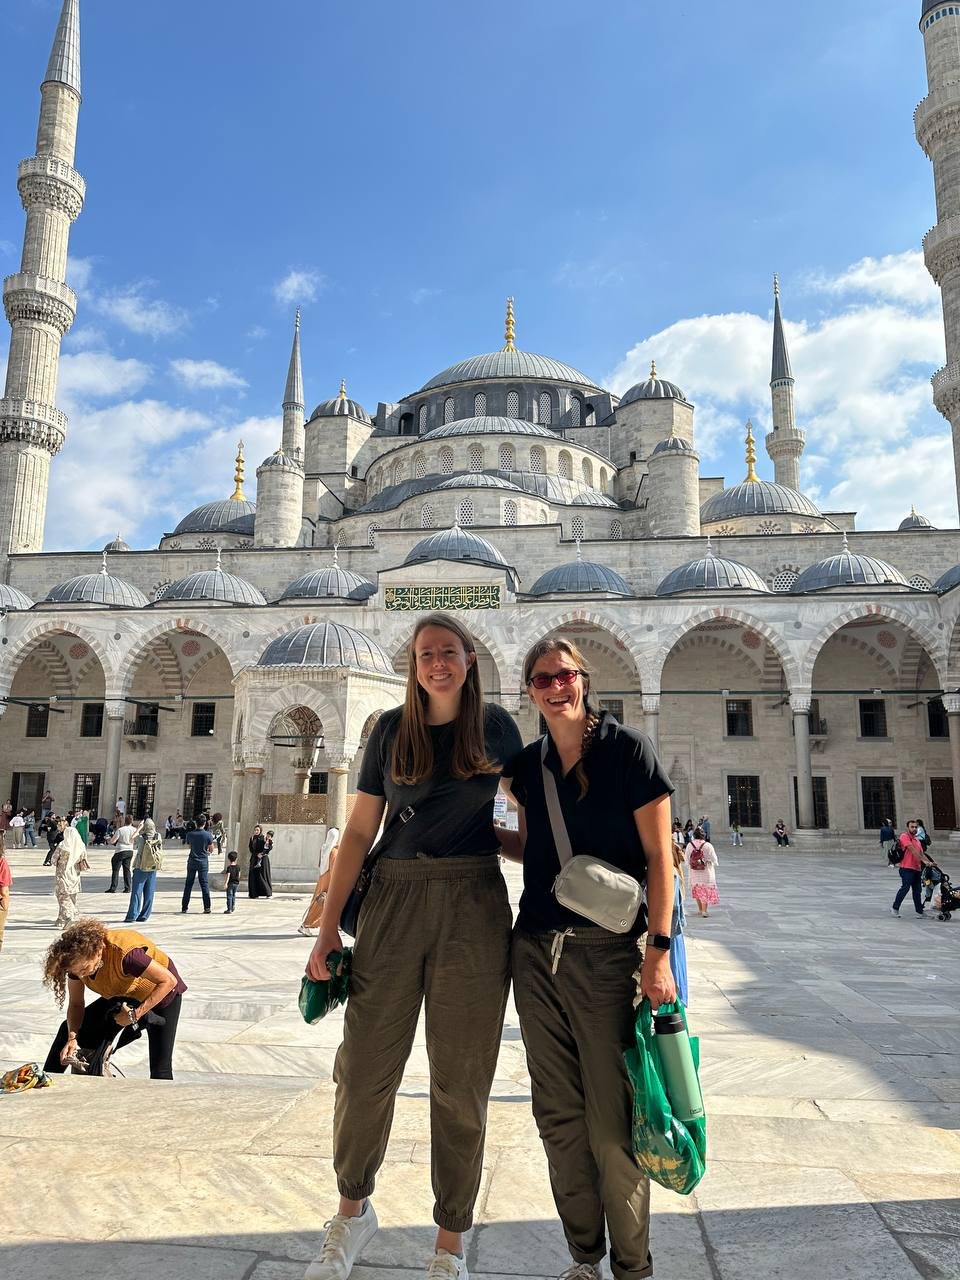 Trustees Hilary Ritchie and Kimmy Briggs (l to r) at the Blue Mosque (built 1616)